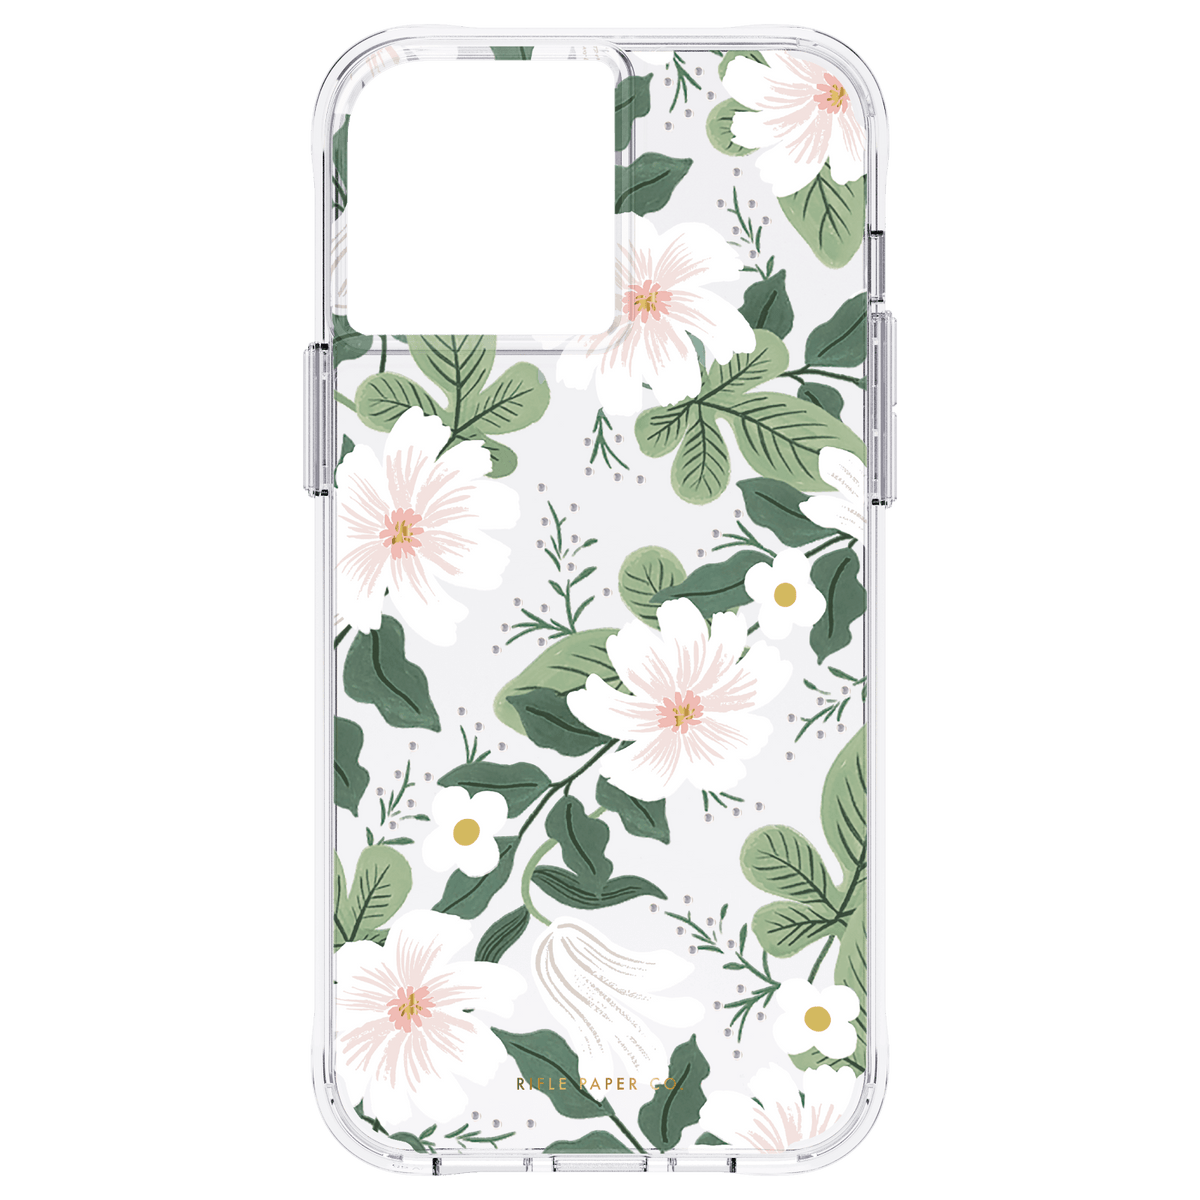 [OPEN BOX] RIFLE PAPER CO. iPhone 13 Pro Max Case - Willow w/ Antimicrobial